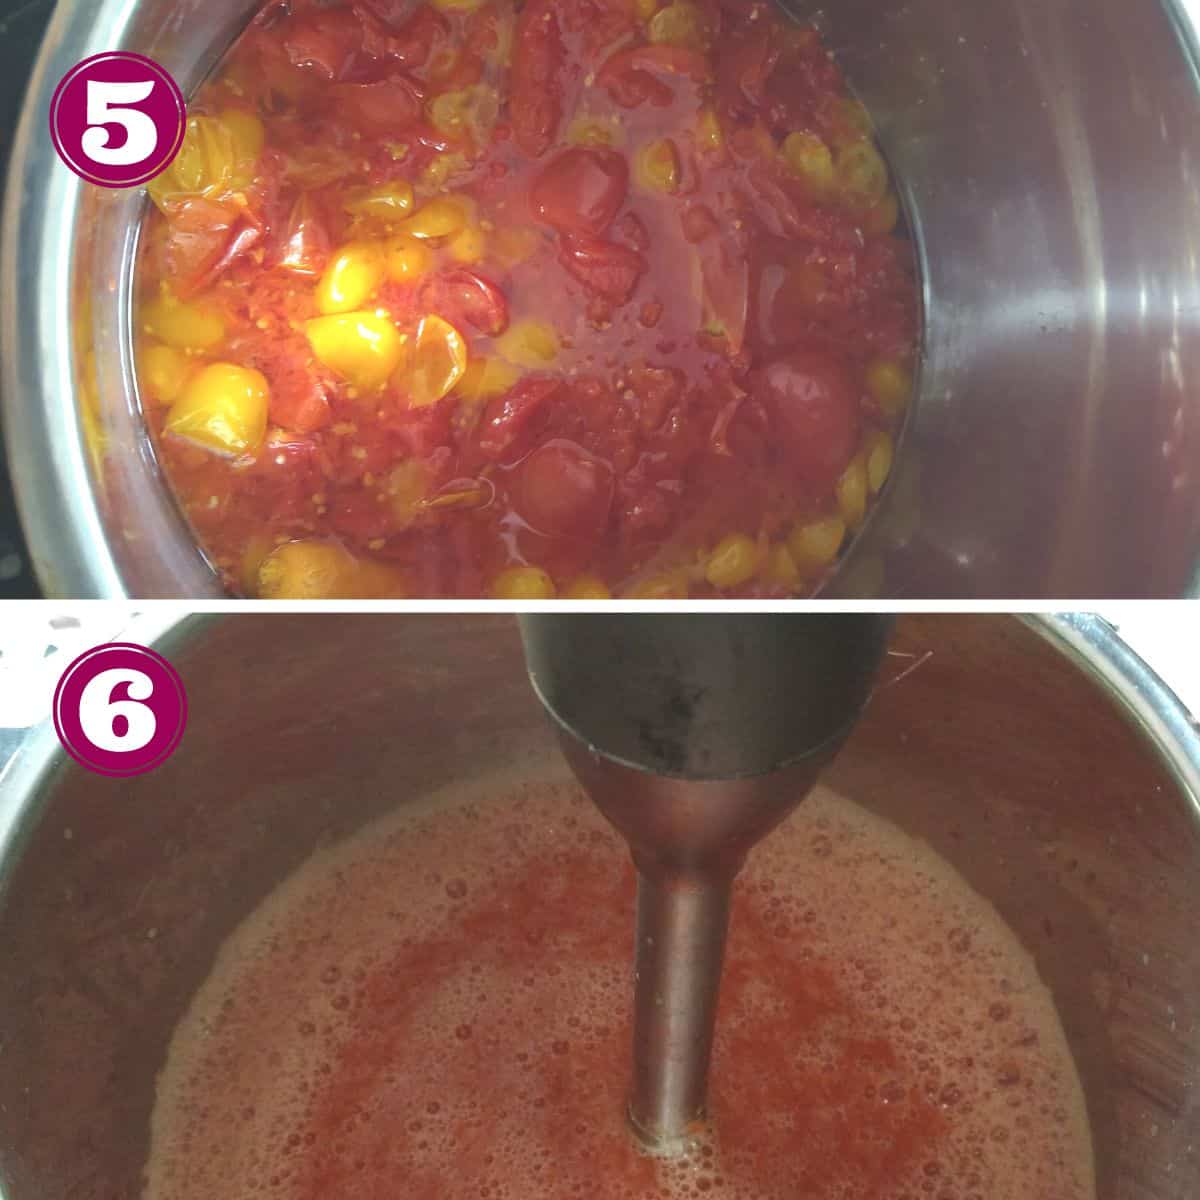 Step 5 shows the tomatoes after they have been cooked
Step 6 shows smoothing out the soup with an immersion blender.